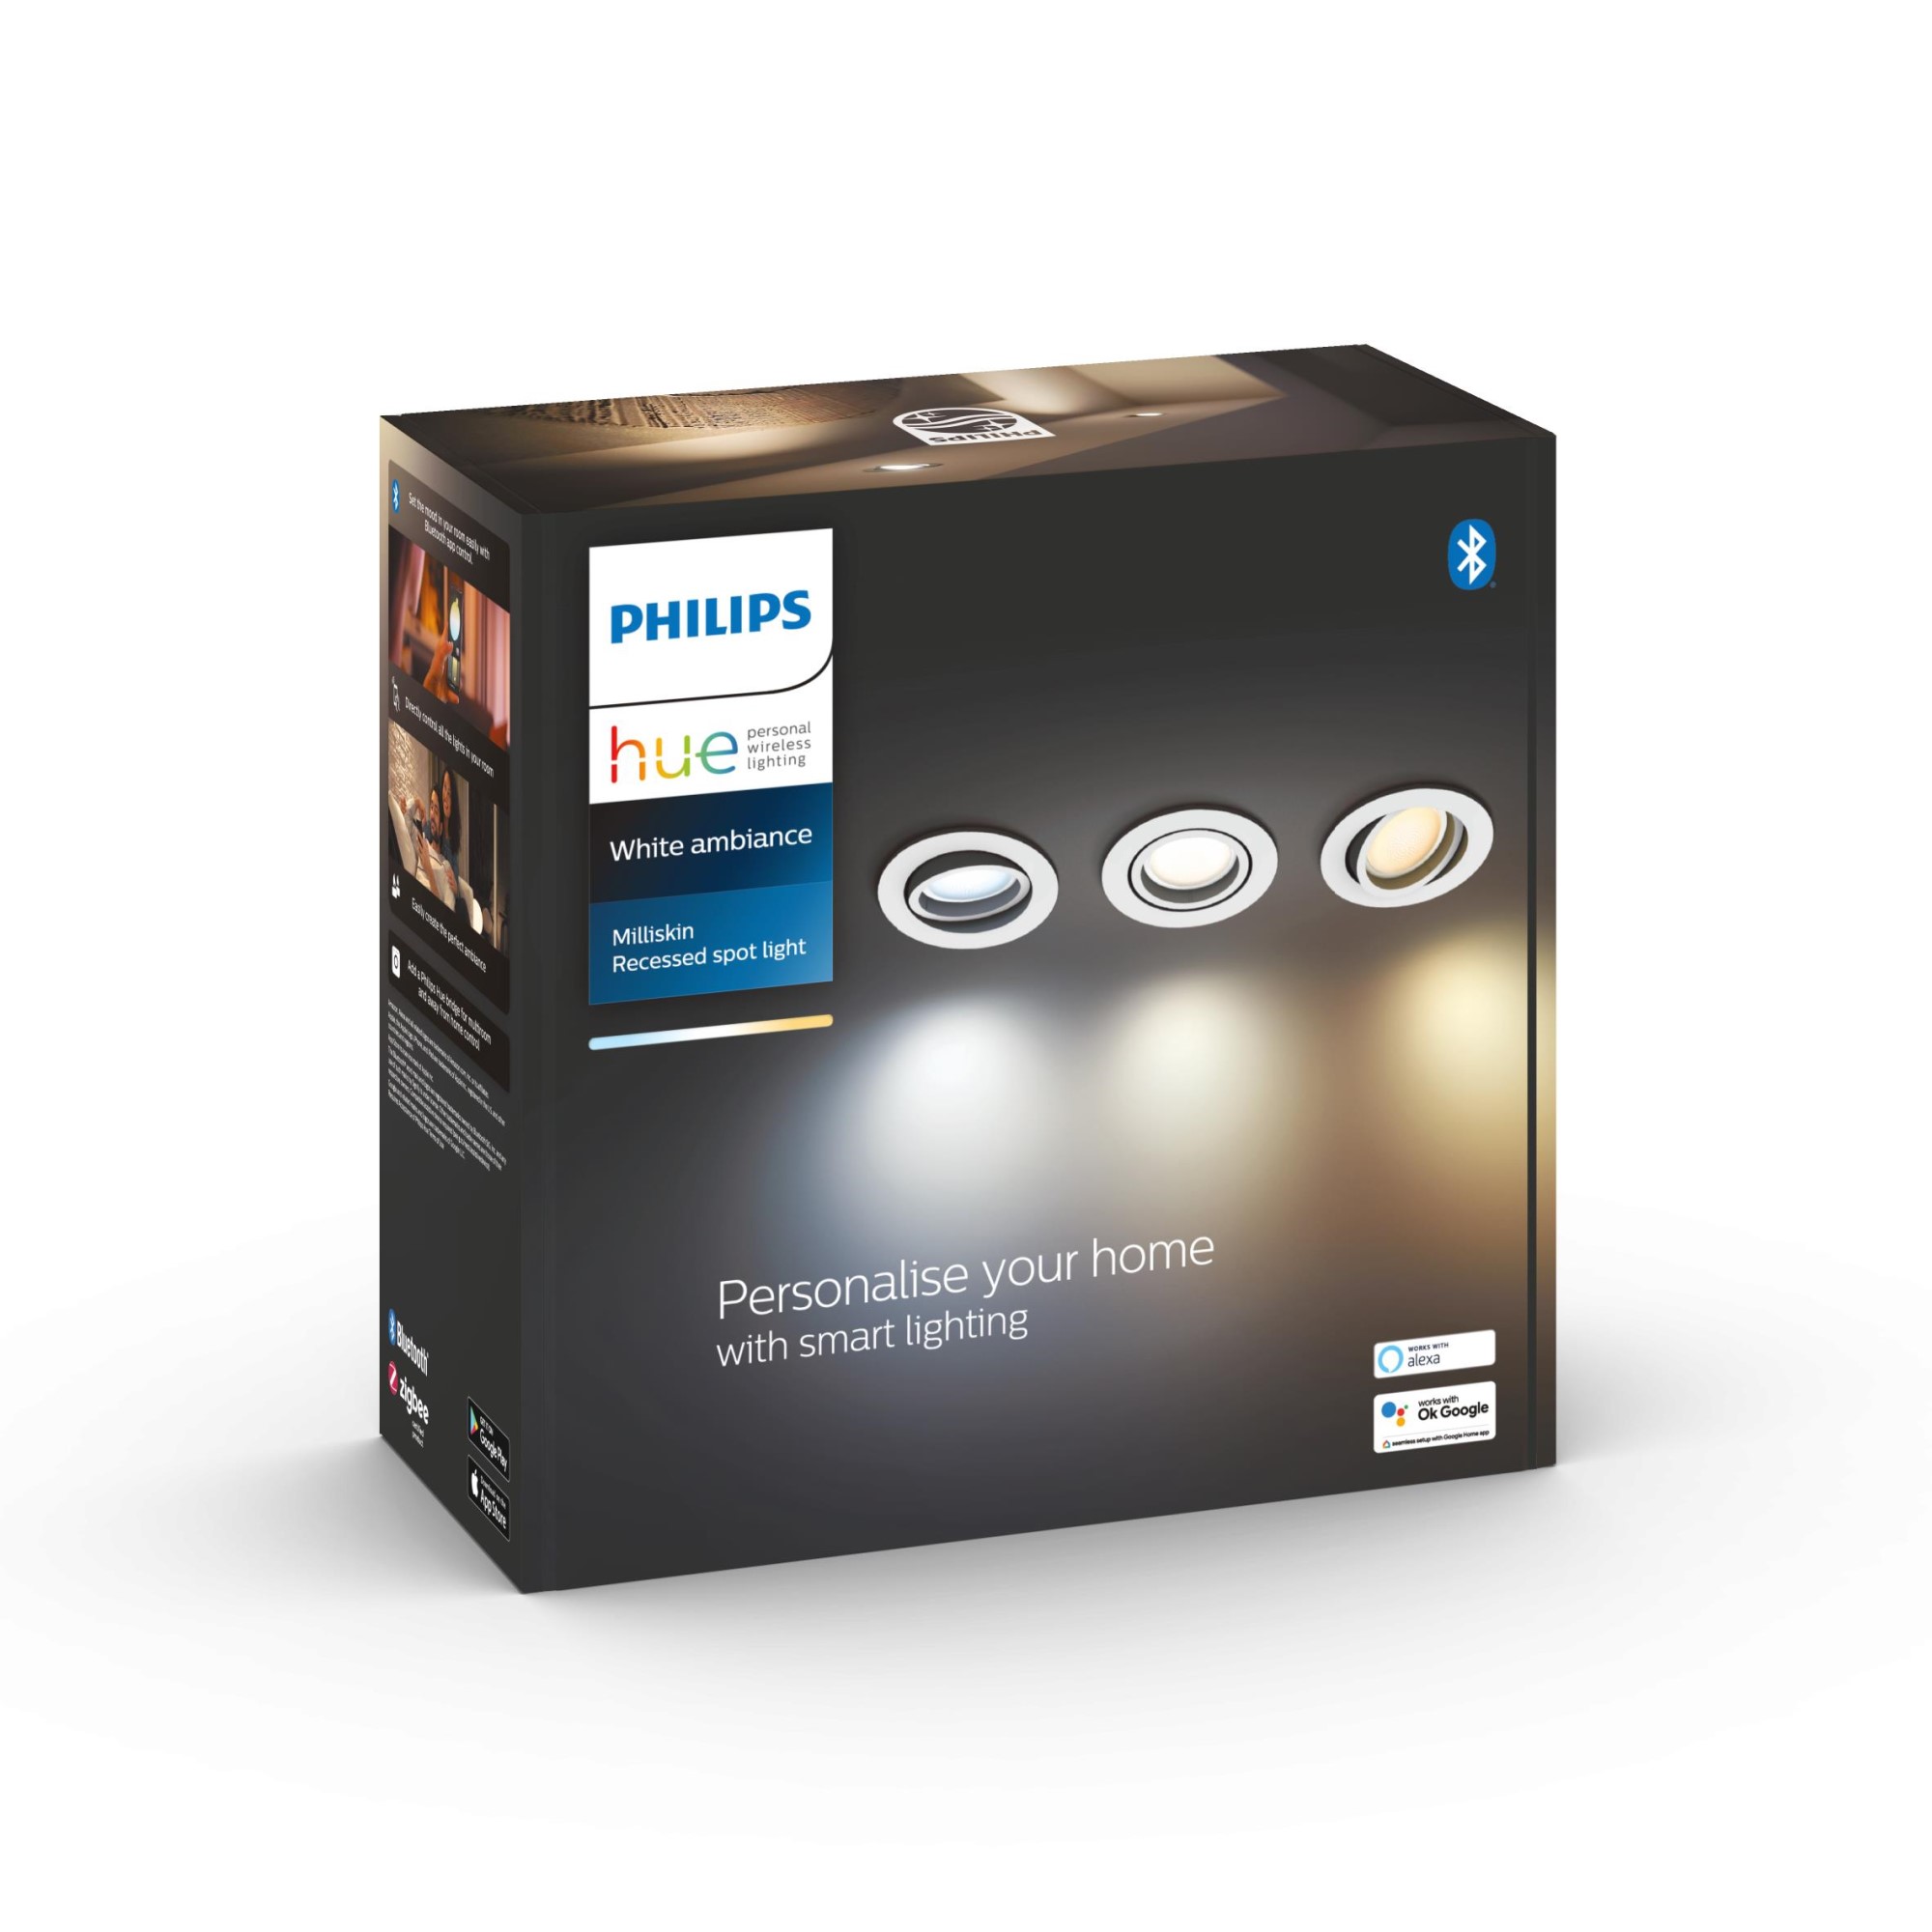 Philips Hue White Ambiance Milliskin LED Downlight round Set of 3 white 3x 350lm incl. Dimmer Switch